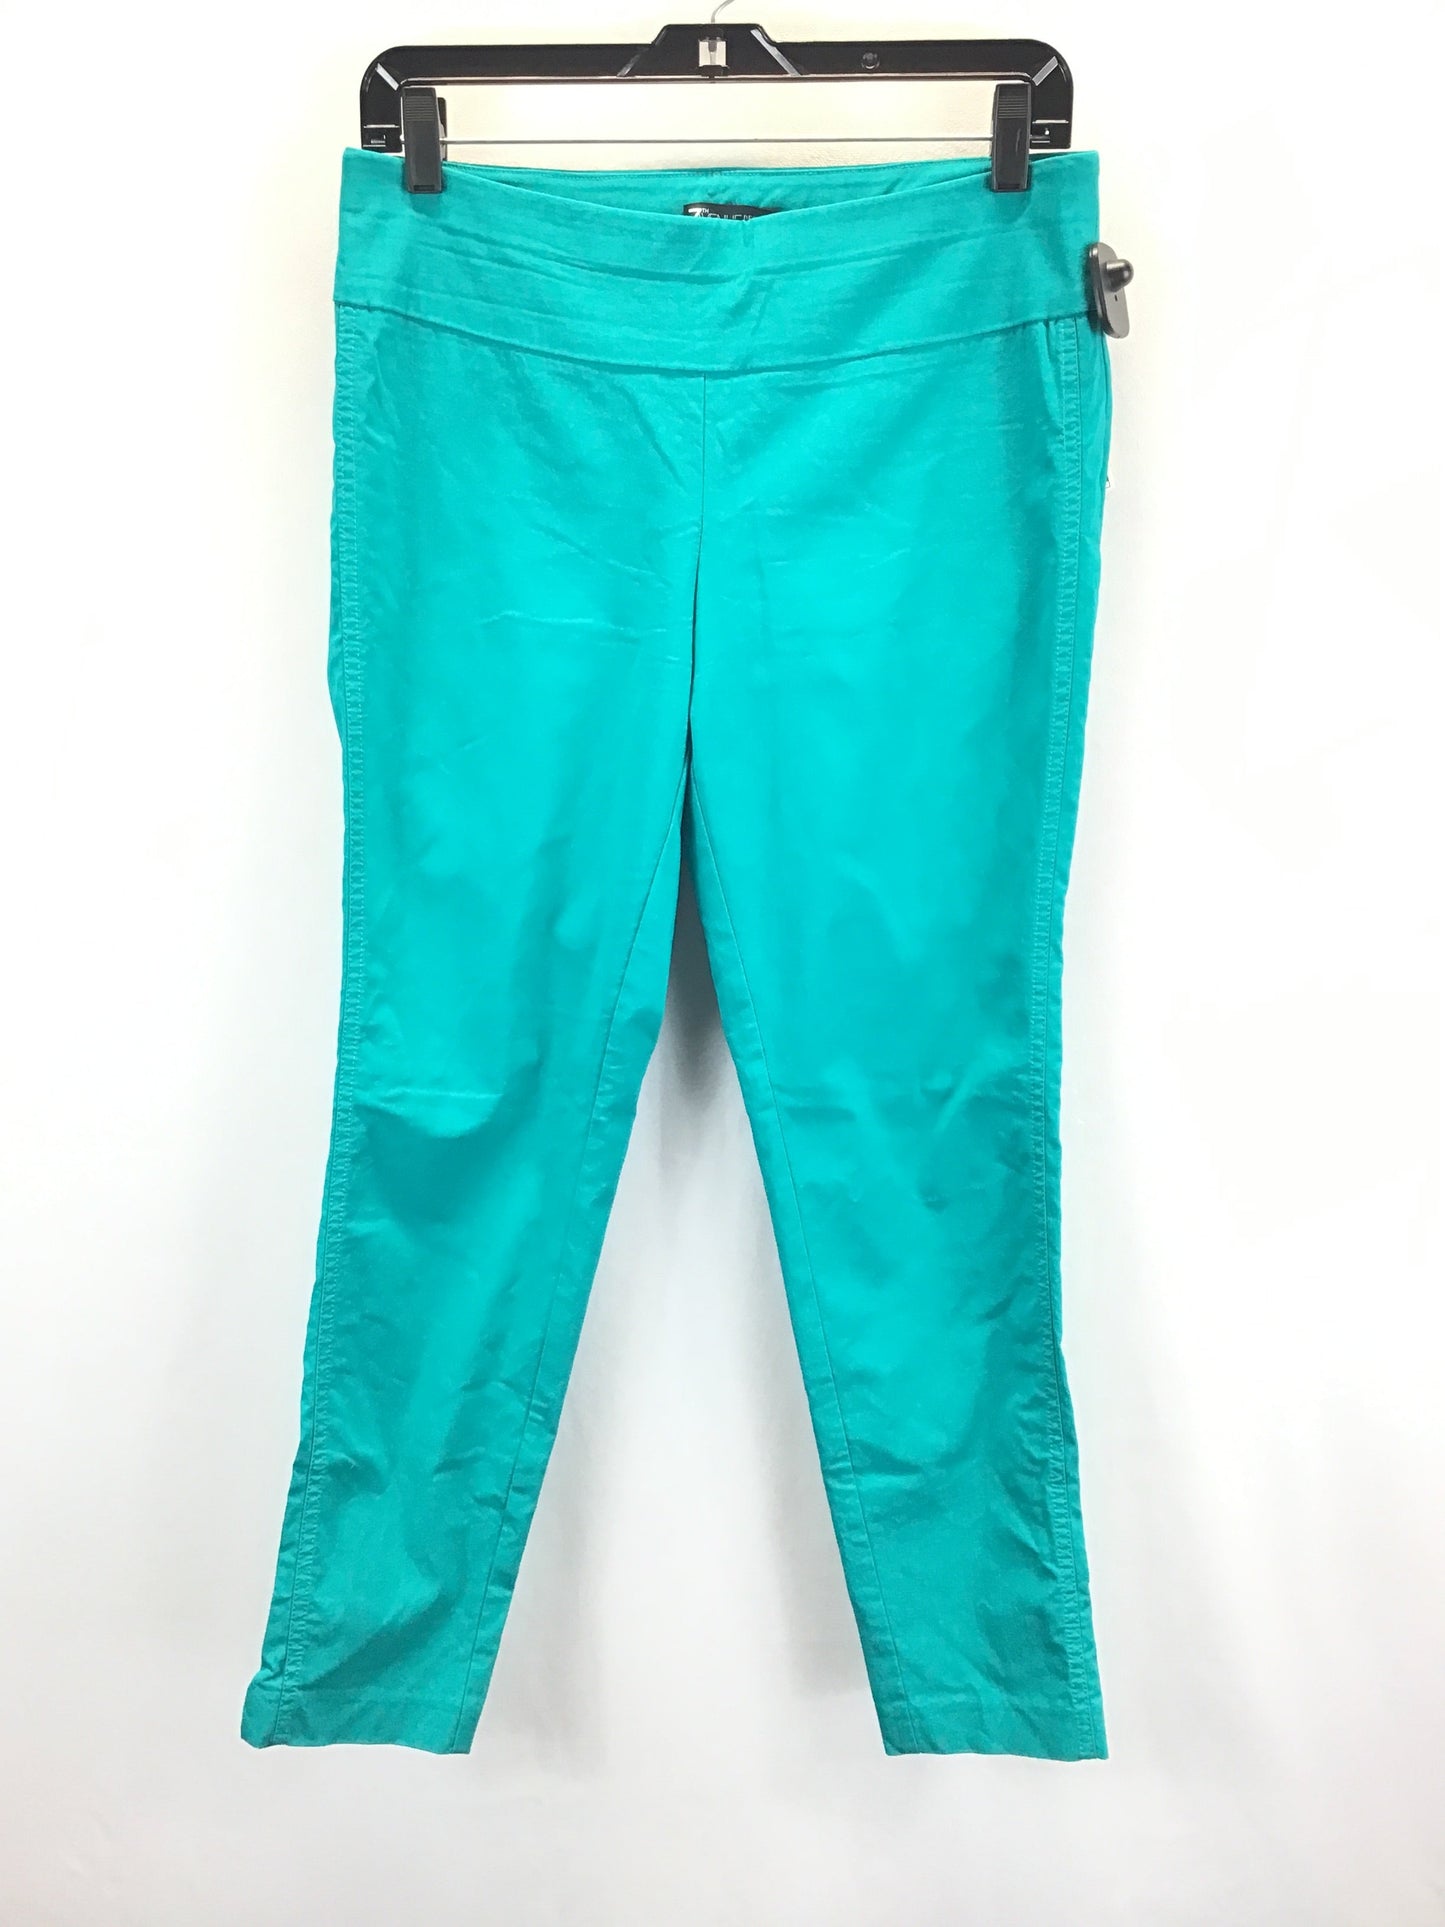 Green Pants Cropped New York And Co, Size M